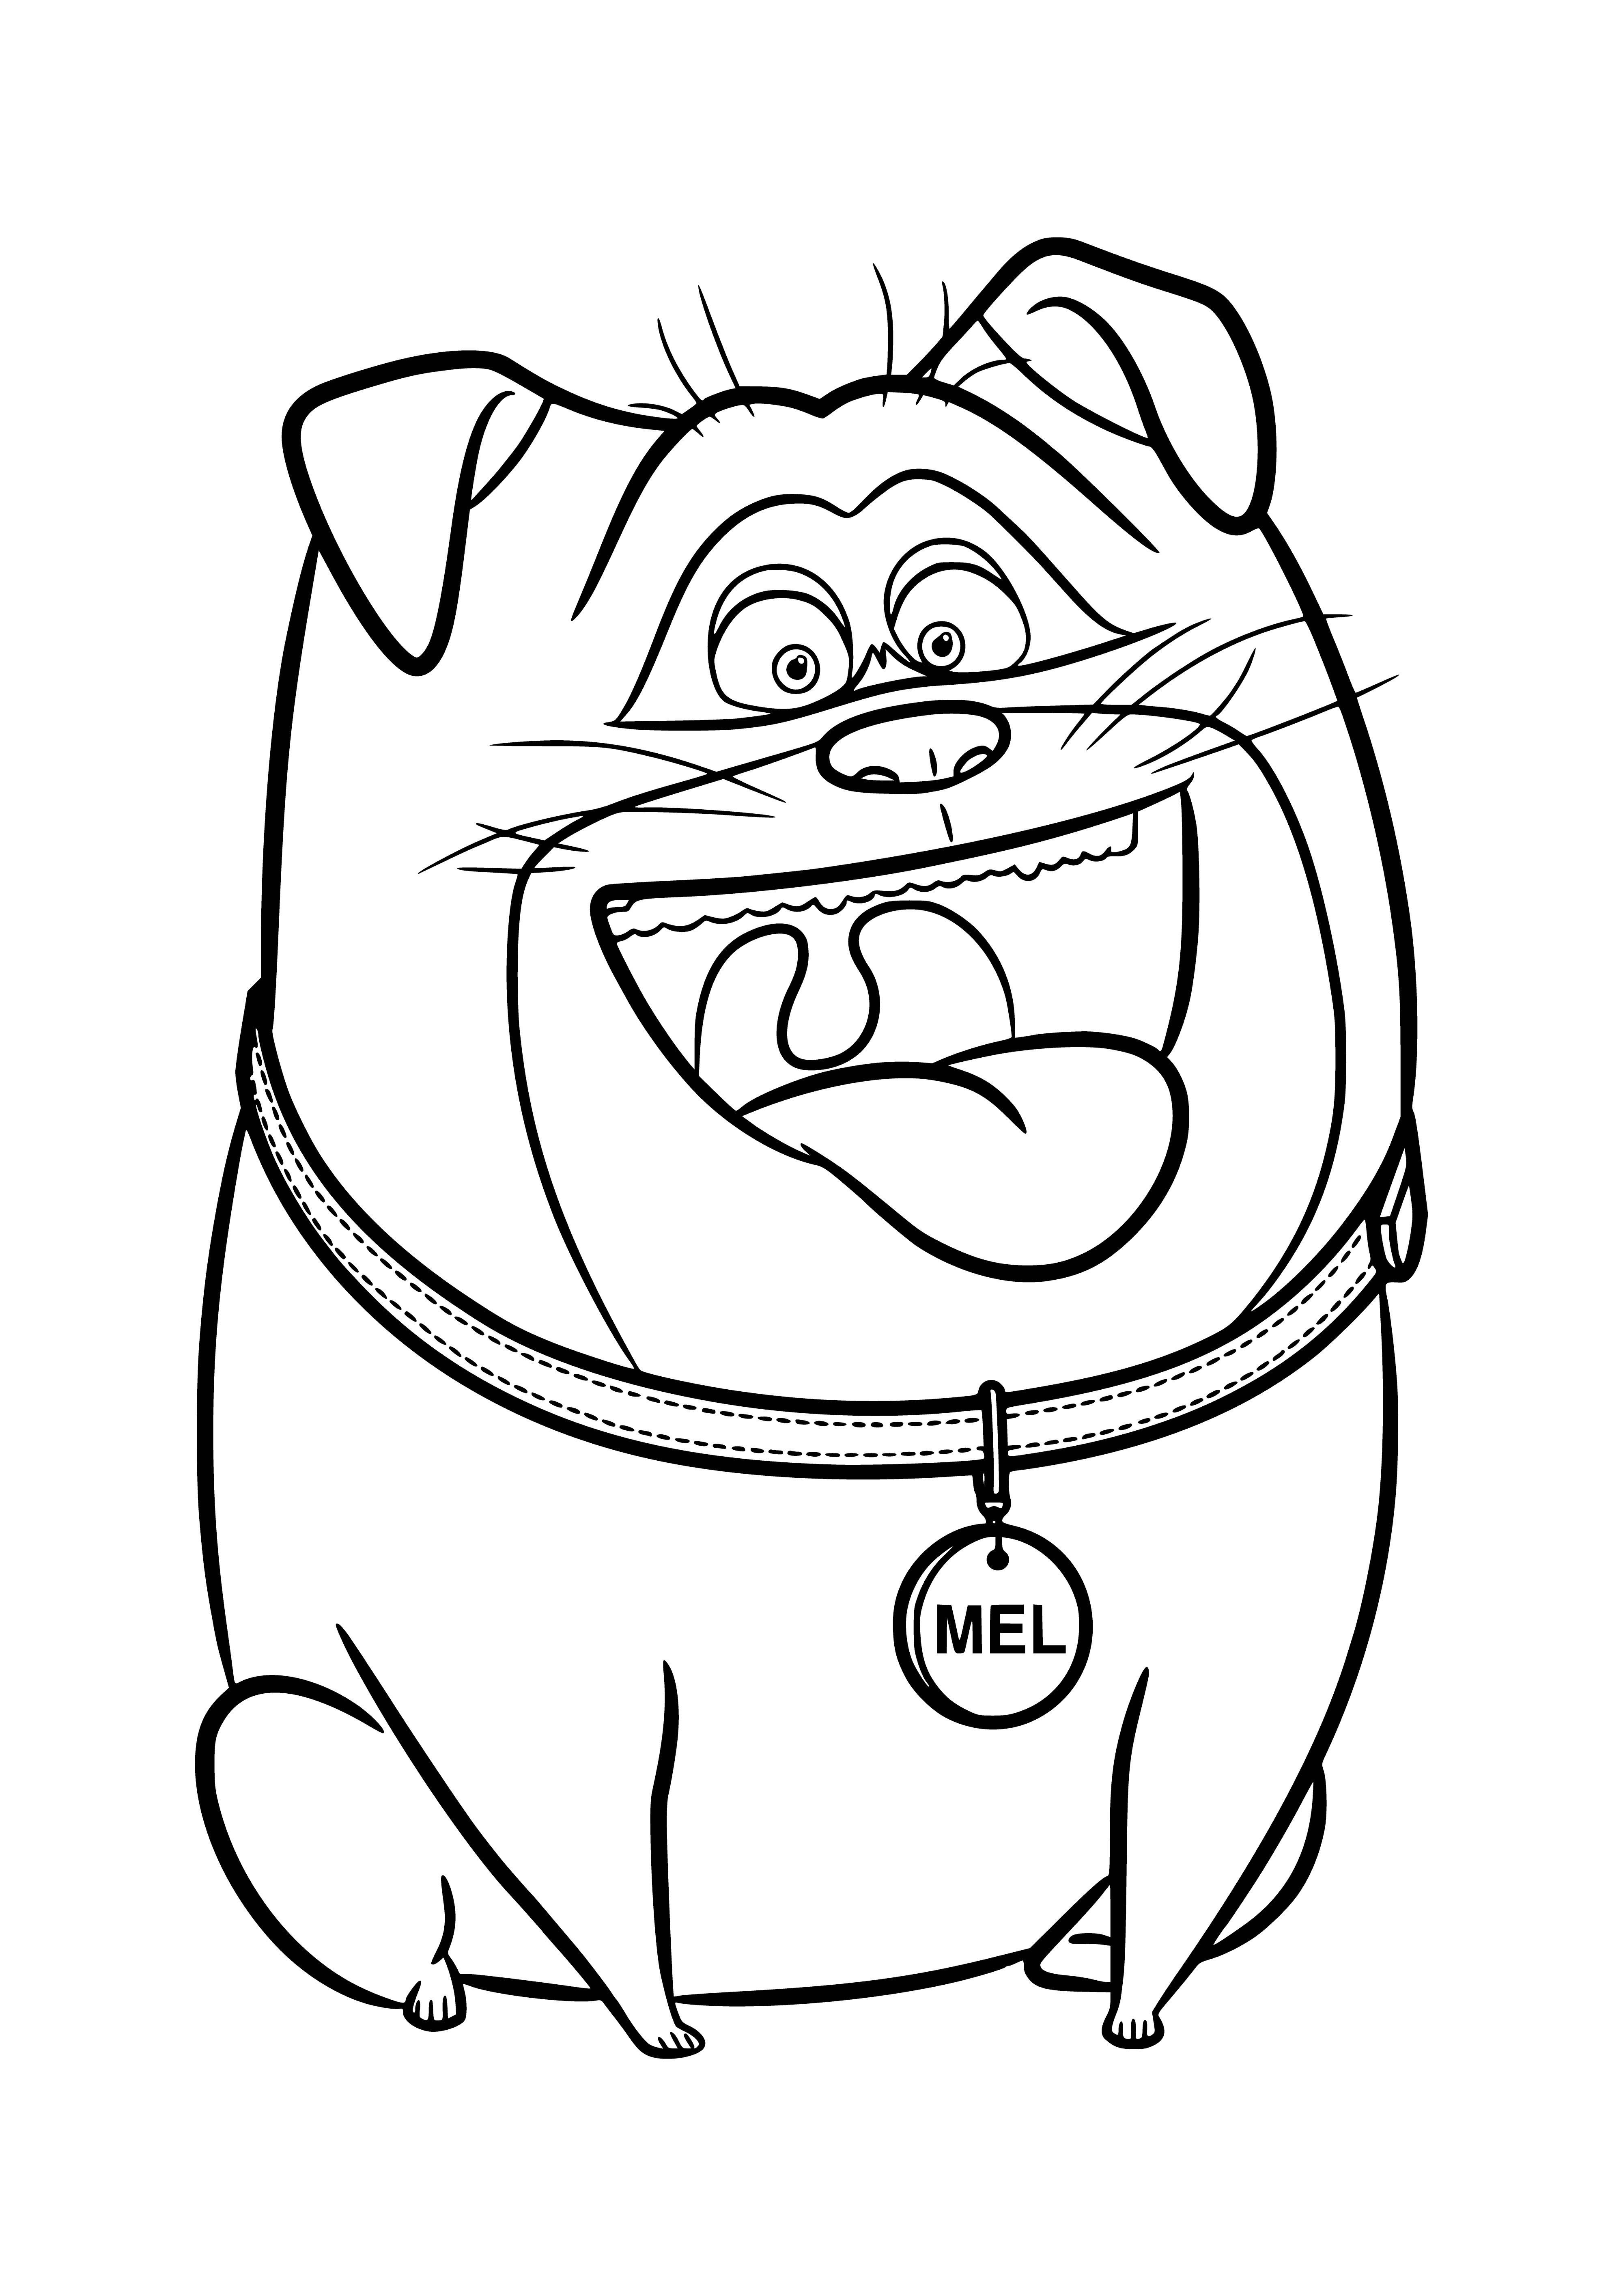 coloring page: A mop with a smiling face holds a broom in its paw while wearing a pink bow. Its bright blue eyes and long eyelashes bring a cheerful look.